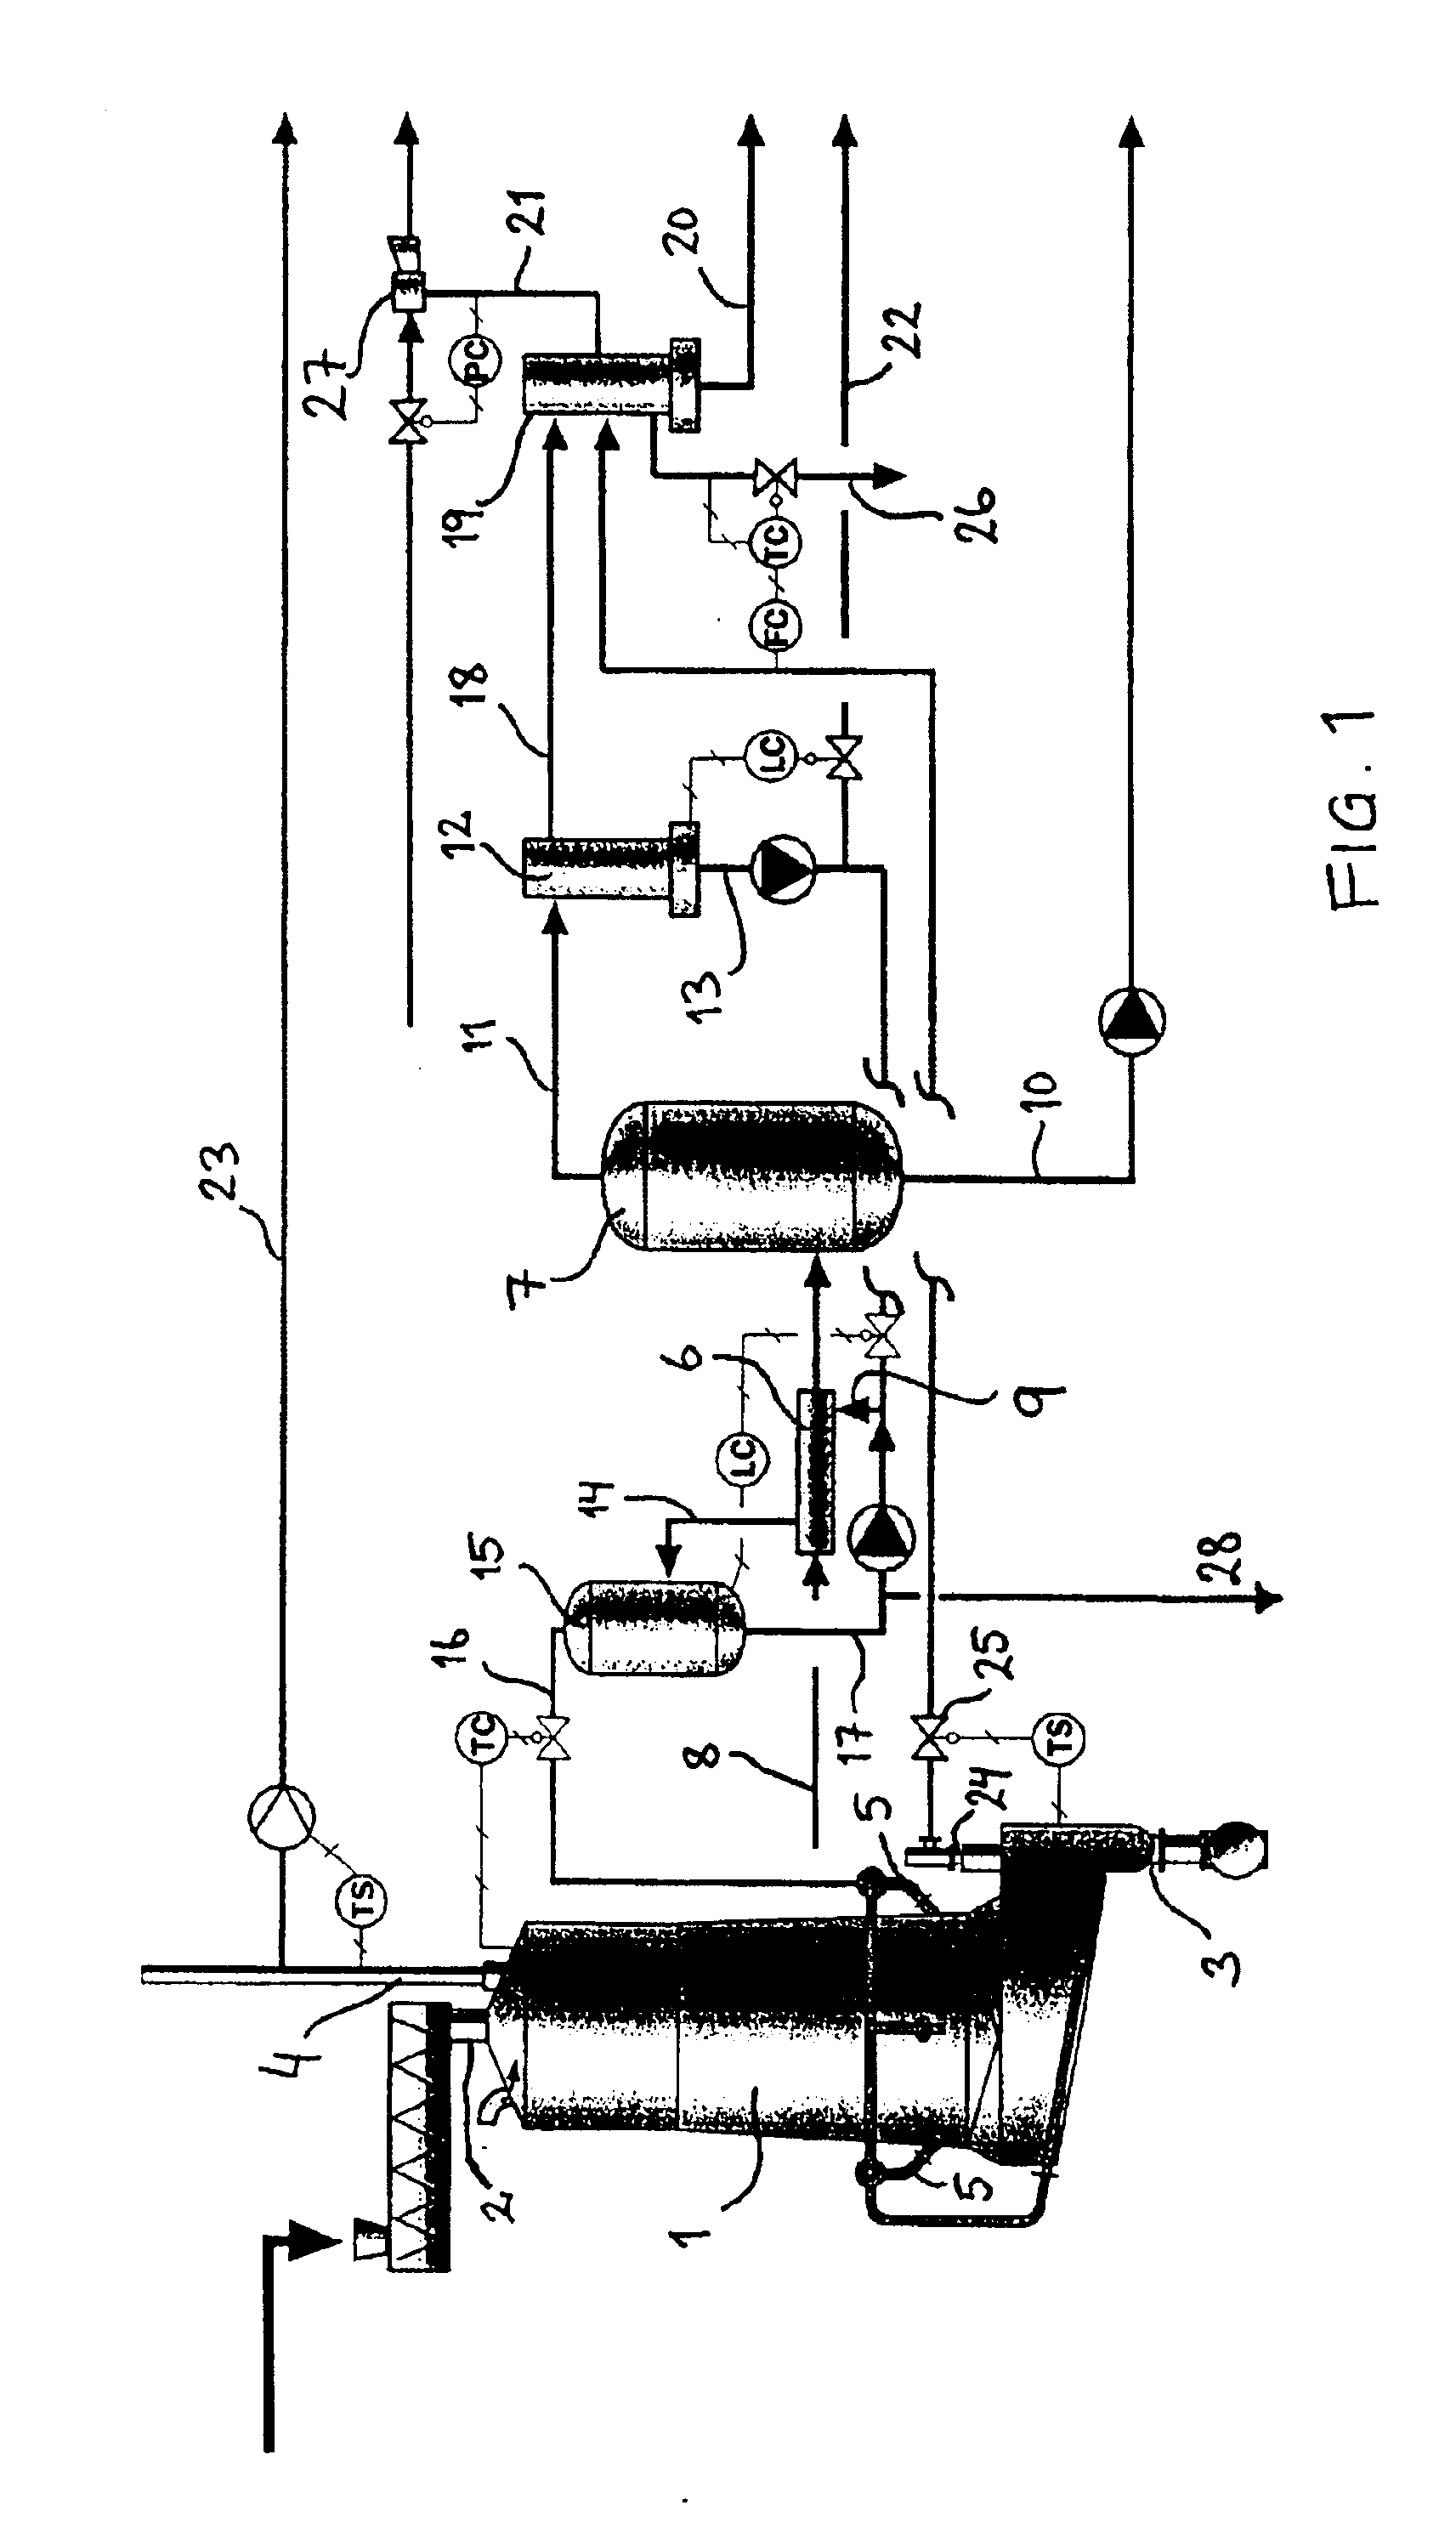 Method of producing process steam from a black liquor